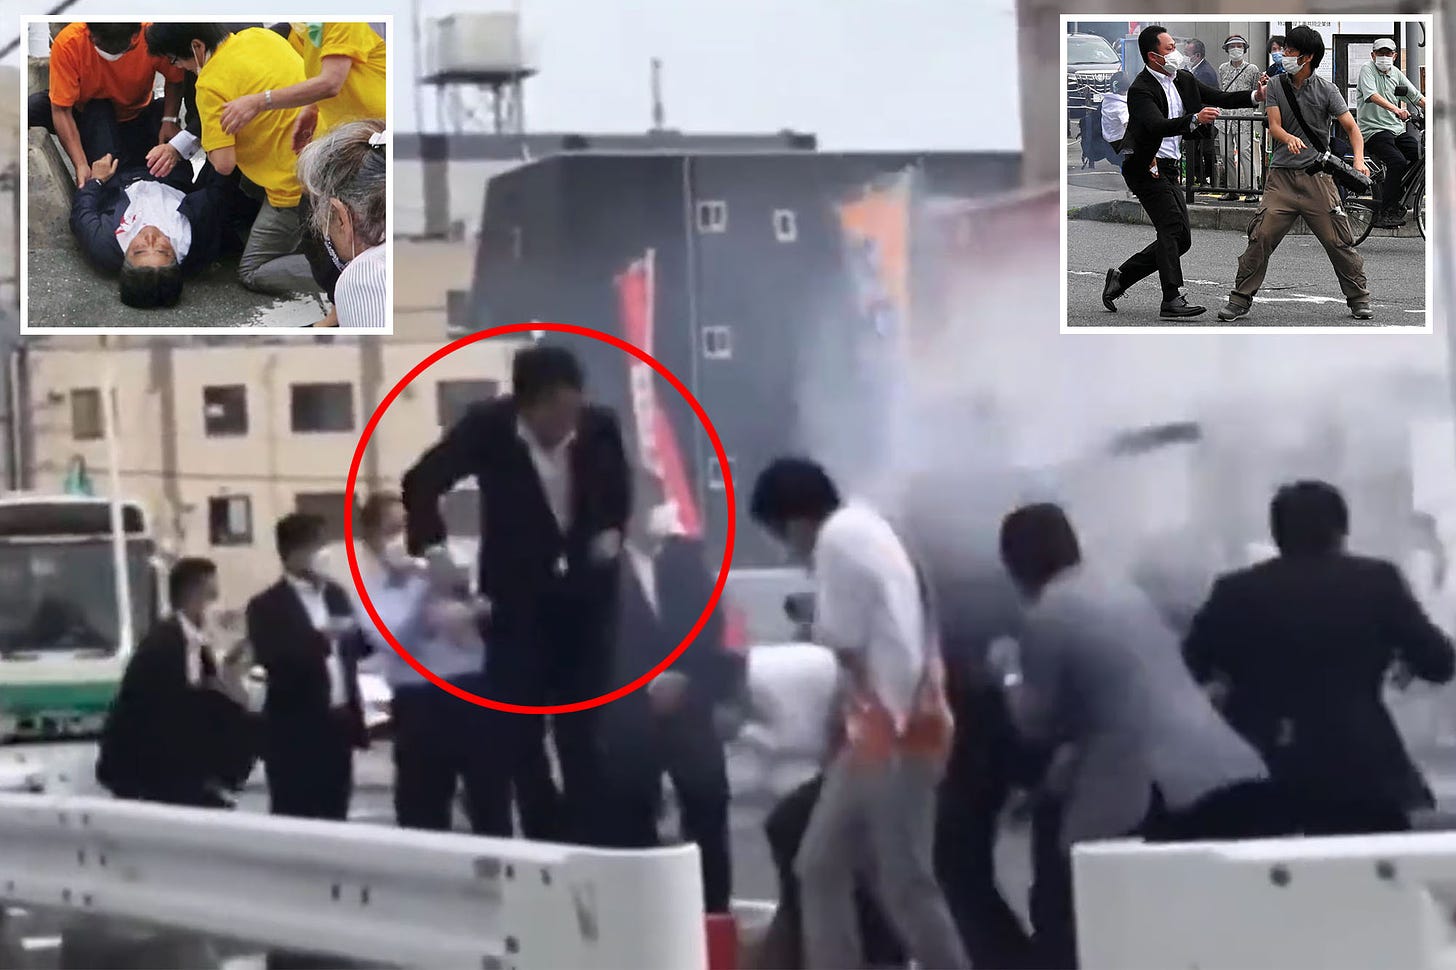 Video shows moment former Japan Prime Minister Shinzo Abe was gunned down